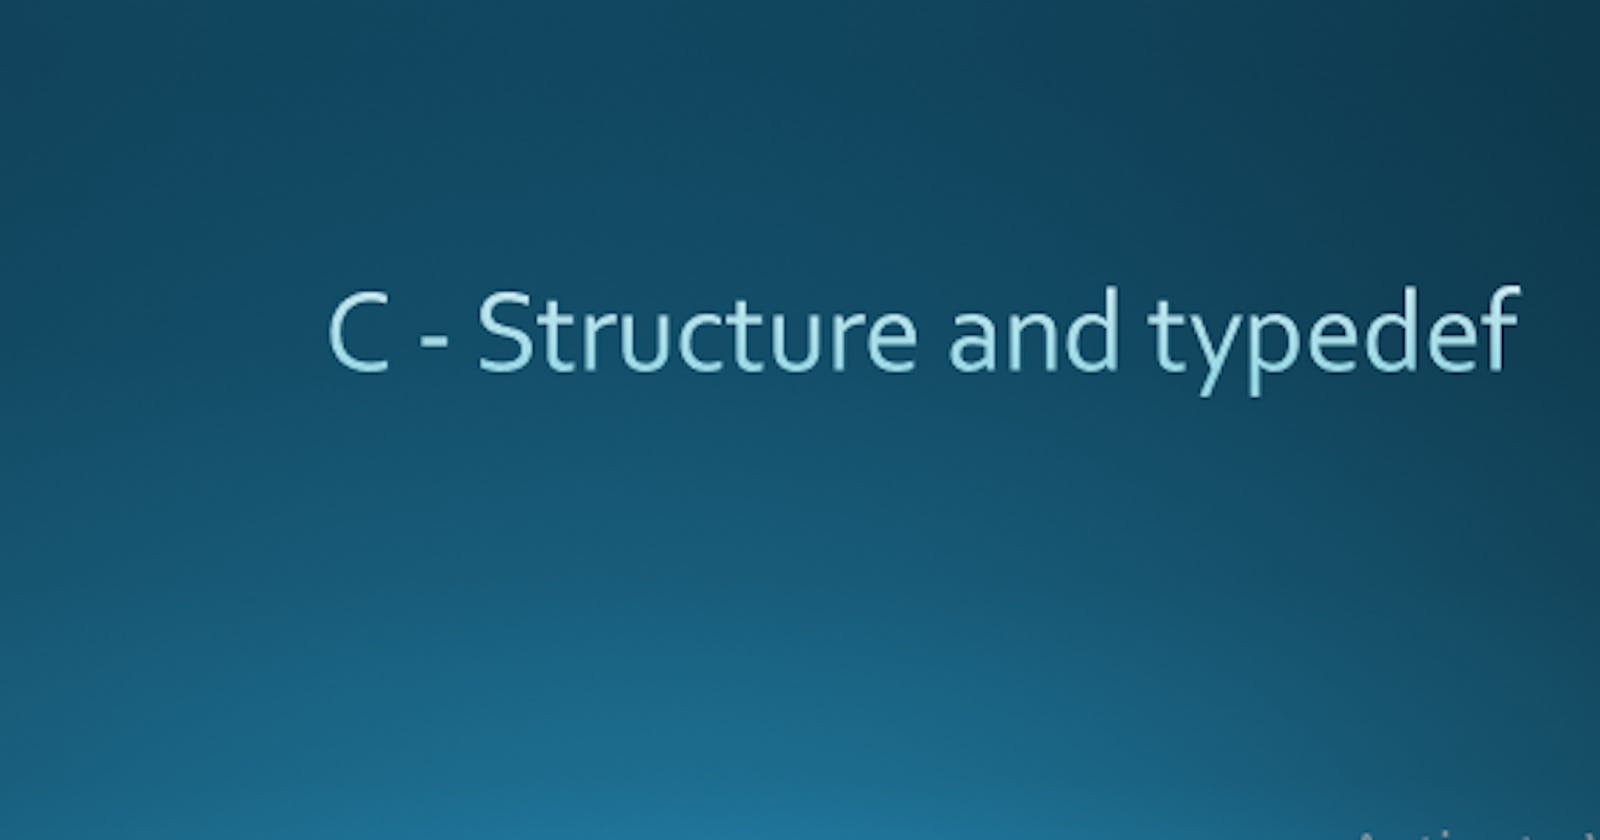 Structure and typedef